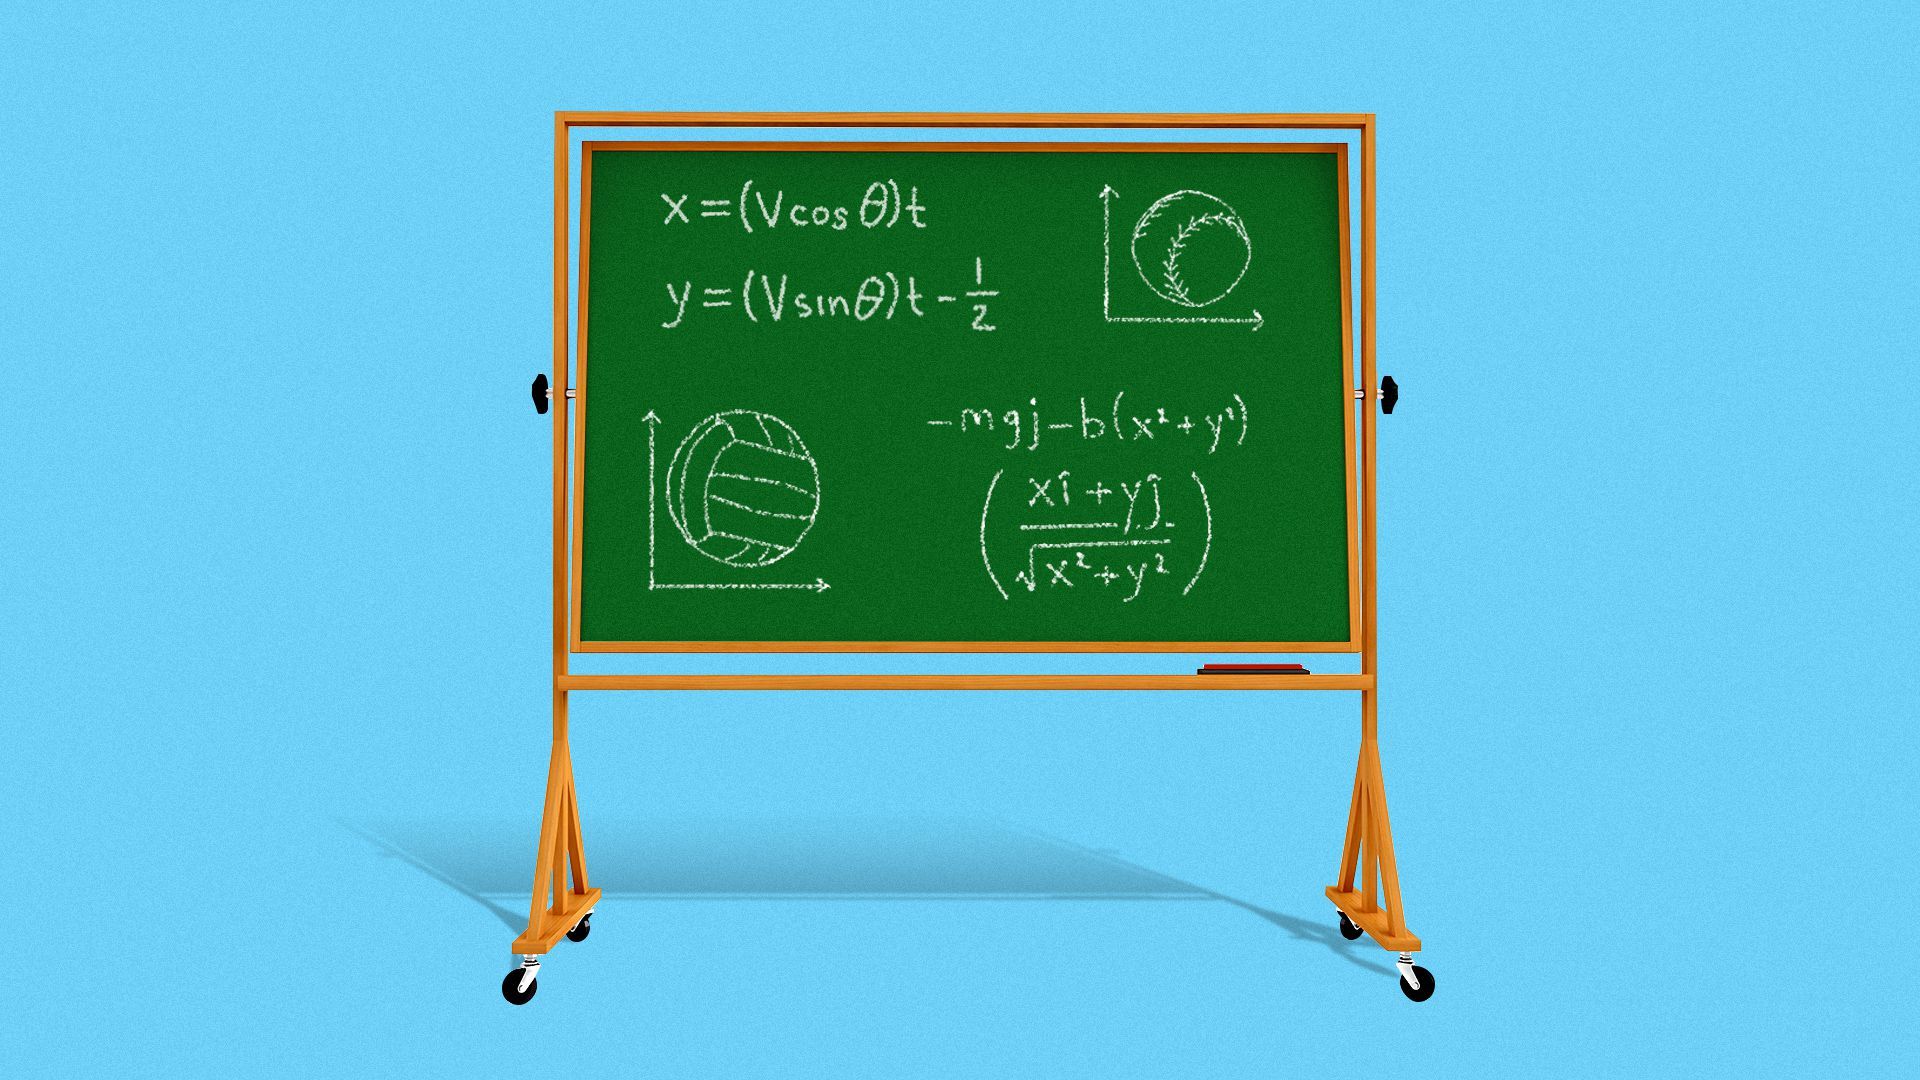 Illustration of a chalkboard with equations, a volleyball and a softball